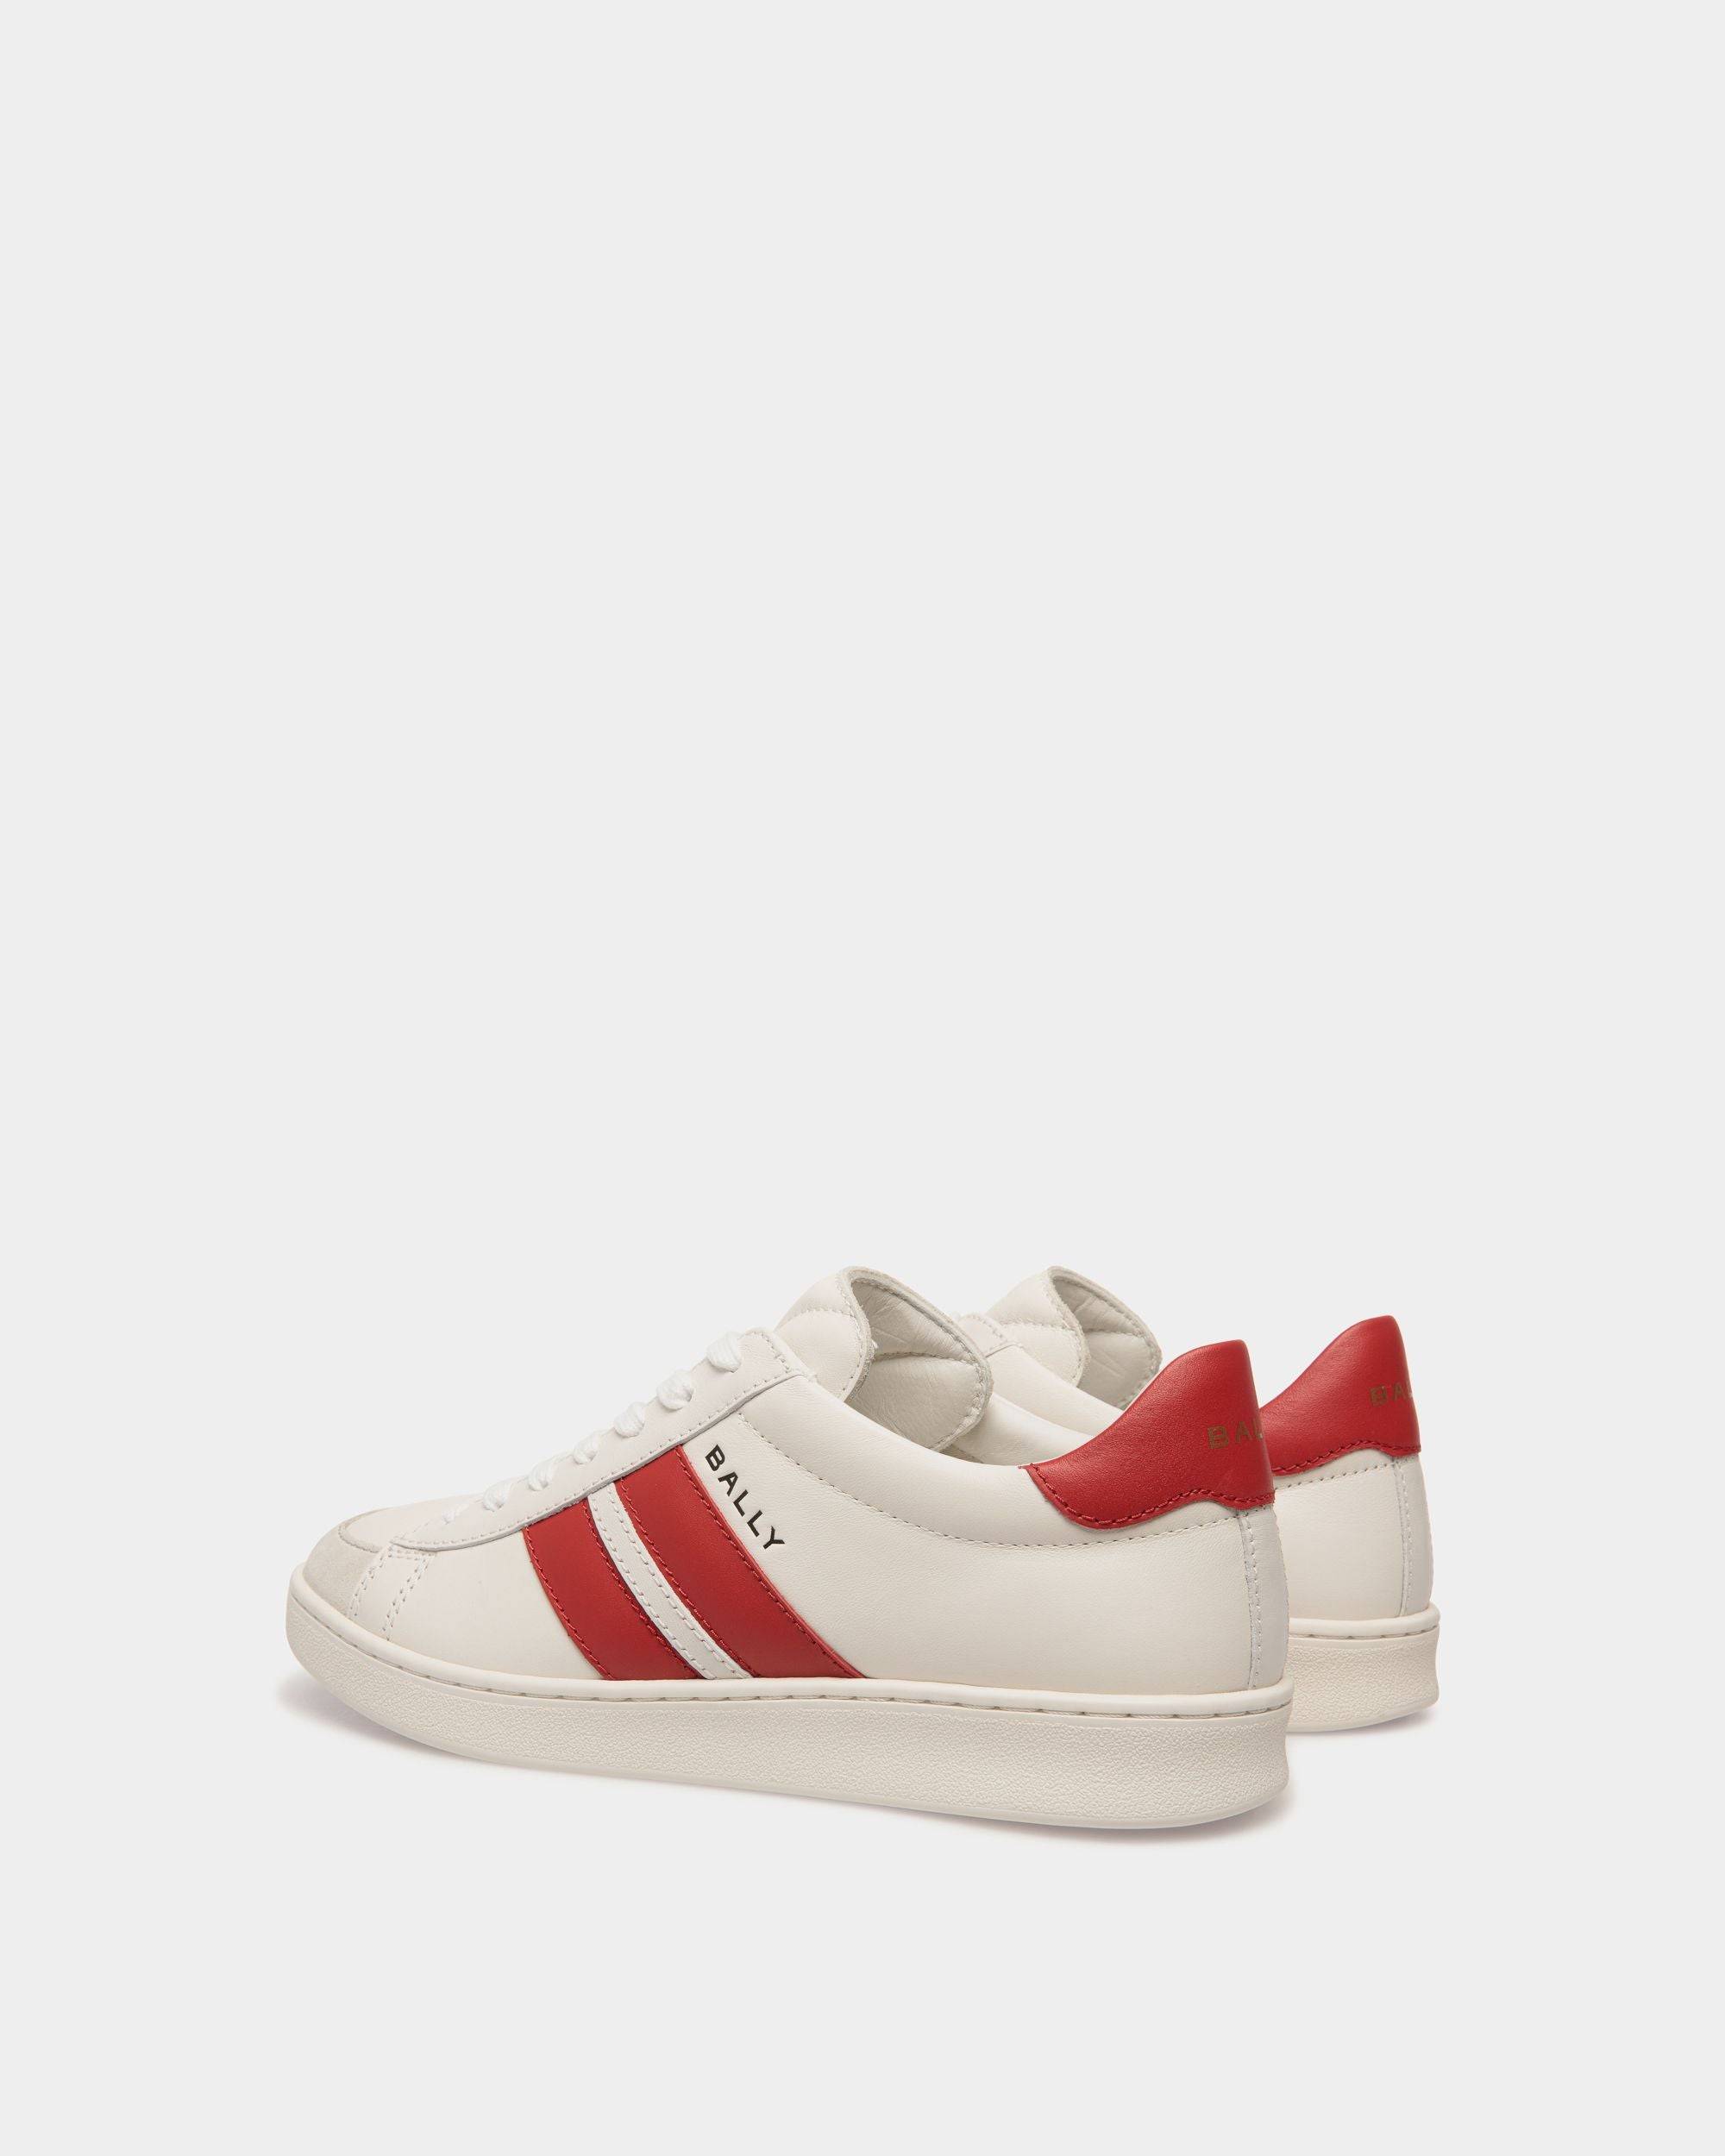 Tennis | Women's Sneaker in White and Candy Red Leather | Bally | Still Life 3/4 Back